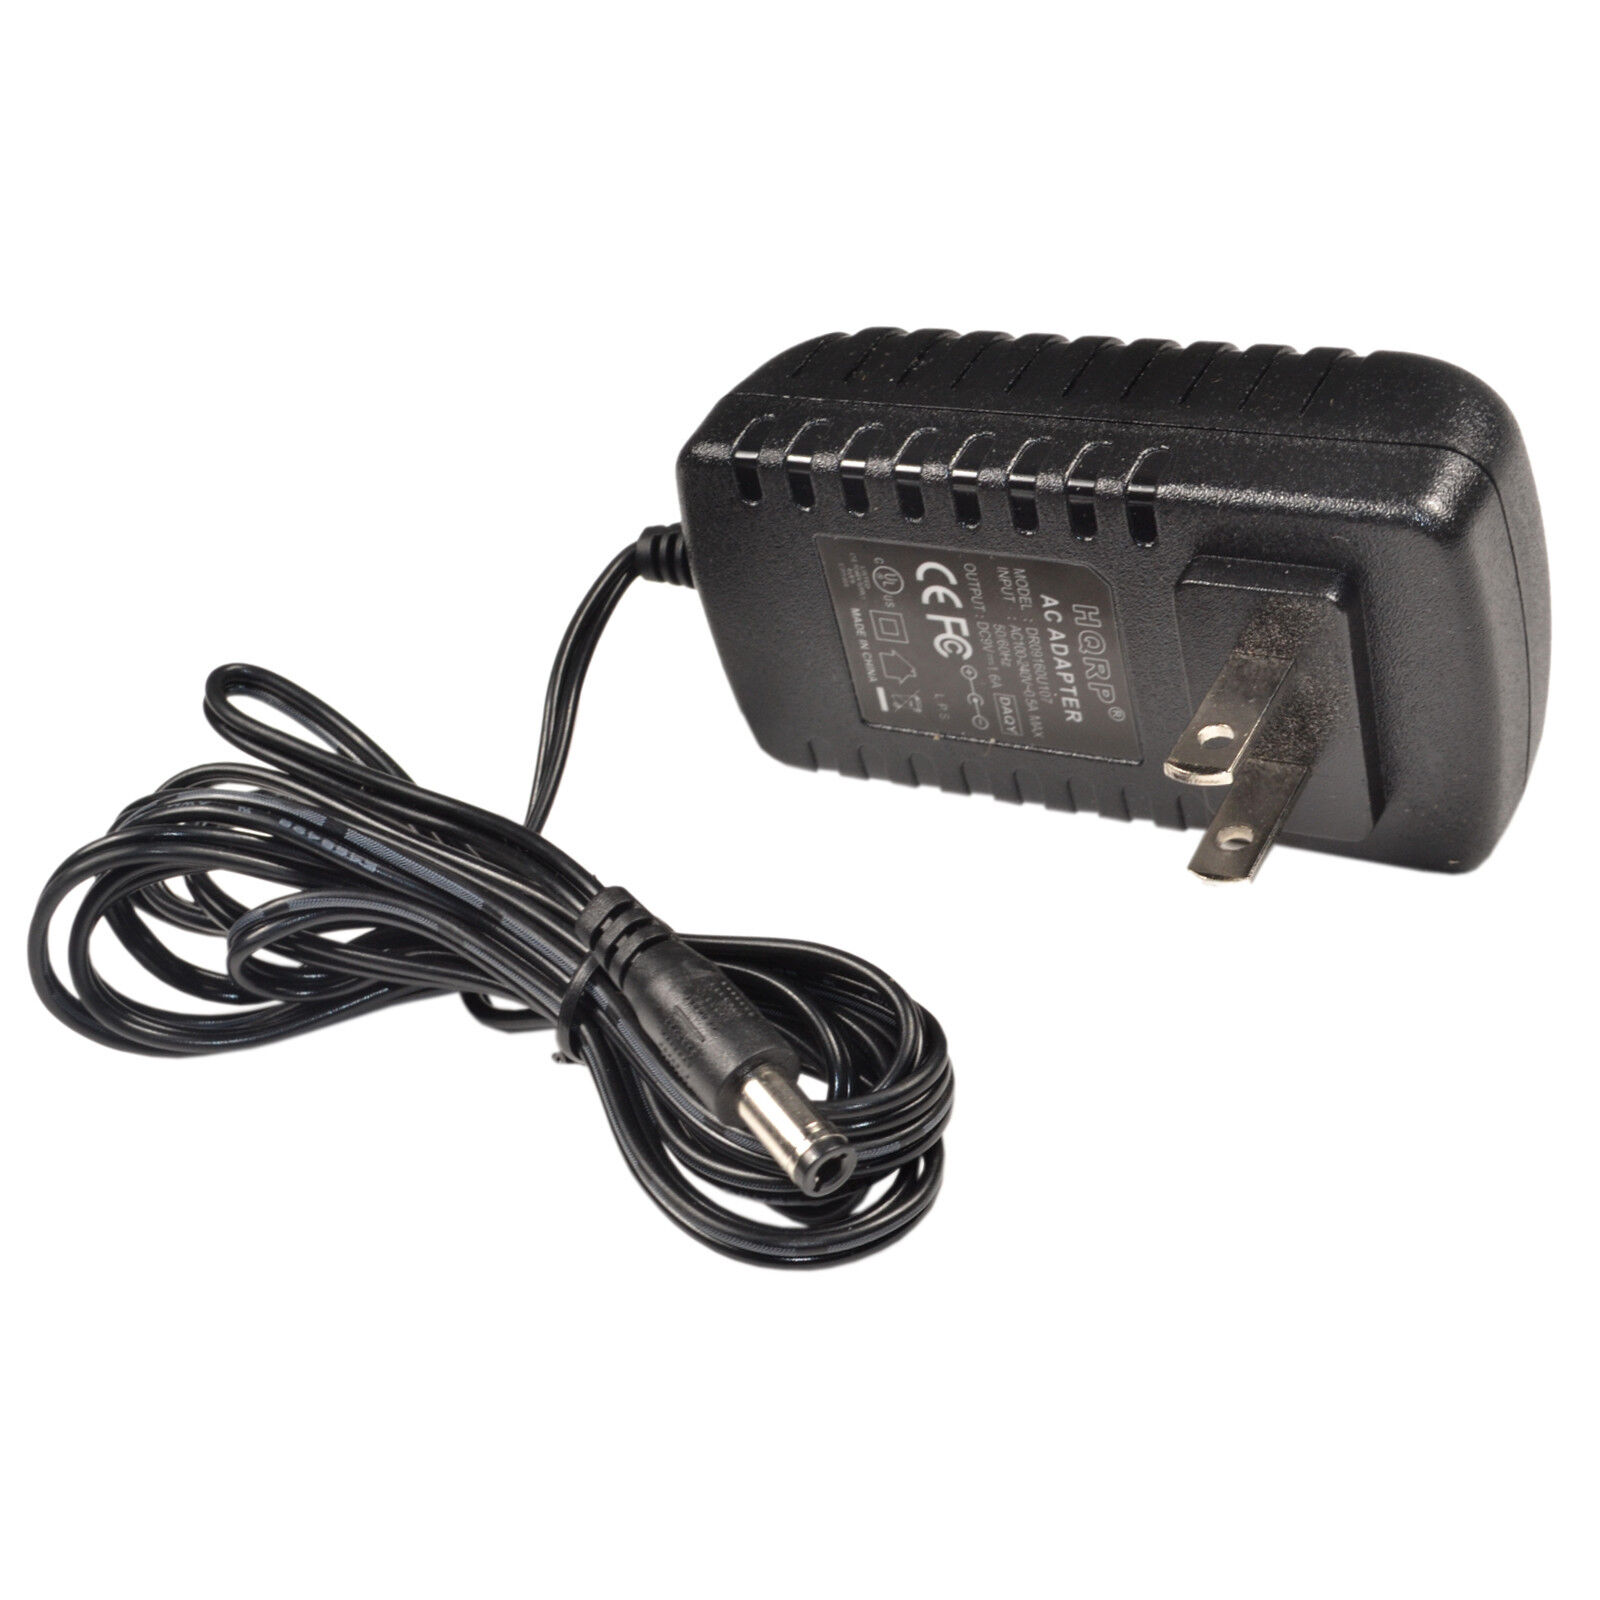 HQRP AC Power Adapter for Brother P-Touch PT-1830 PT-1880 PT-20 PT-25